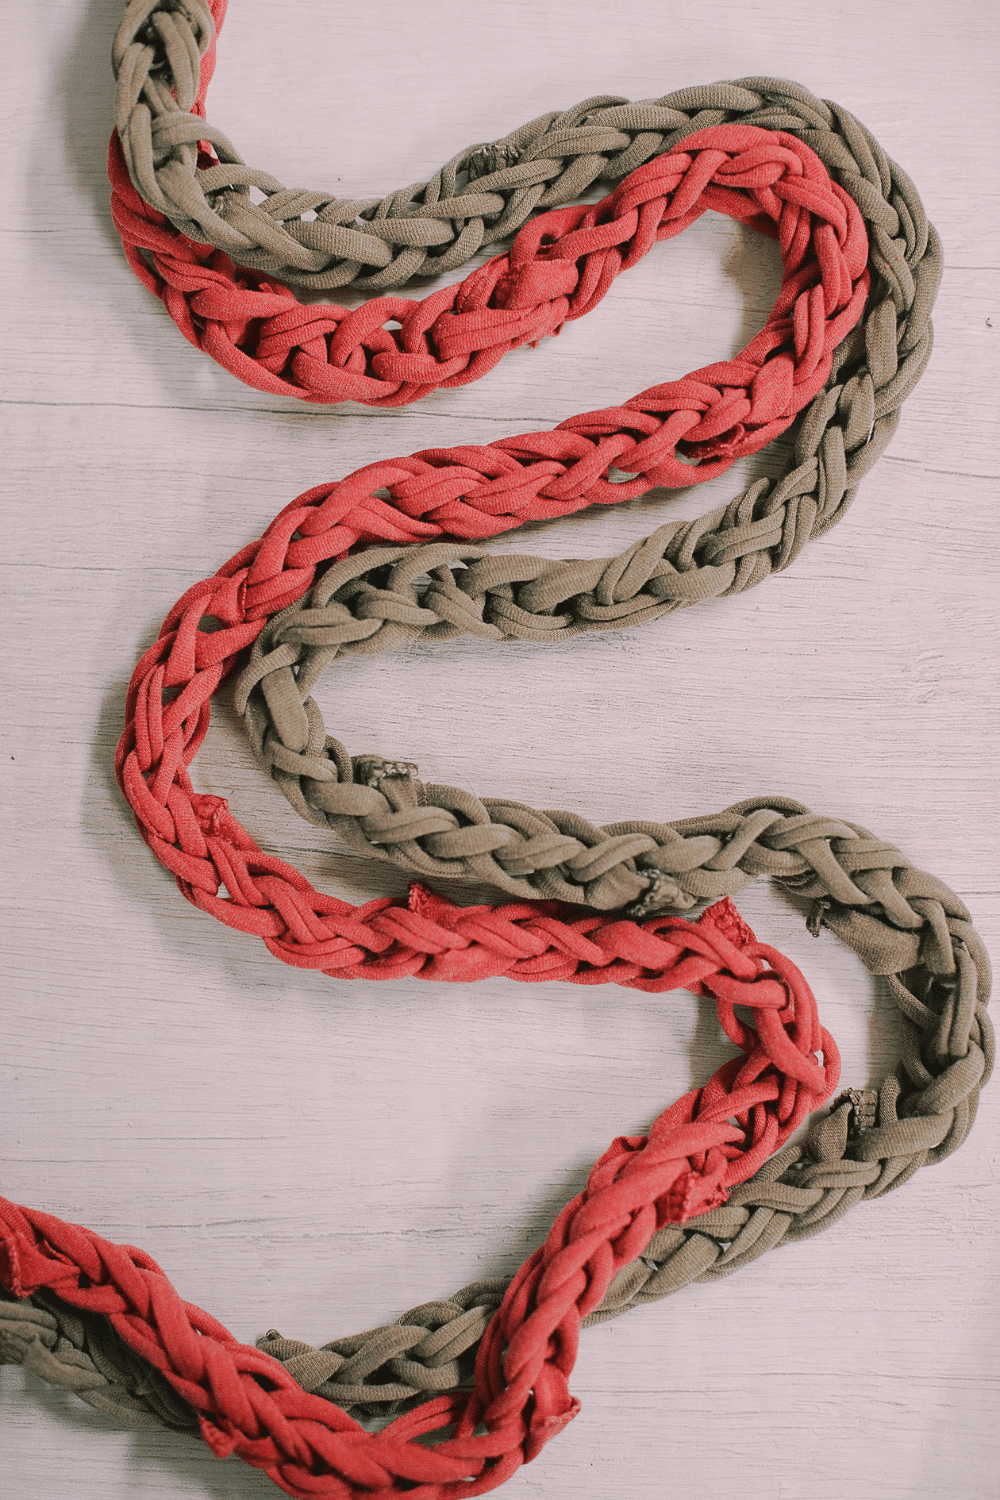 How to Make a Finger-Knit Garland using T-Shirt Yarn